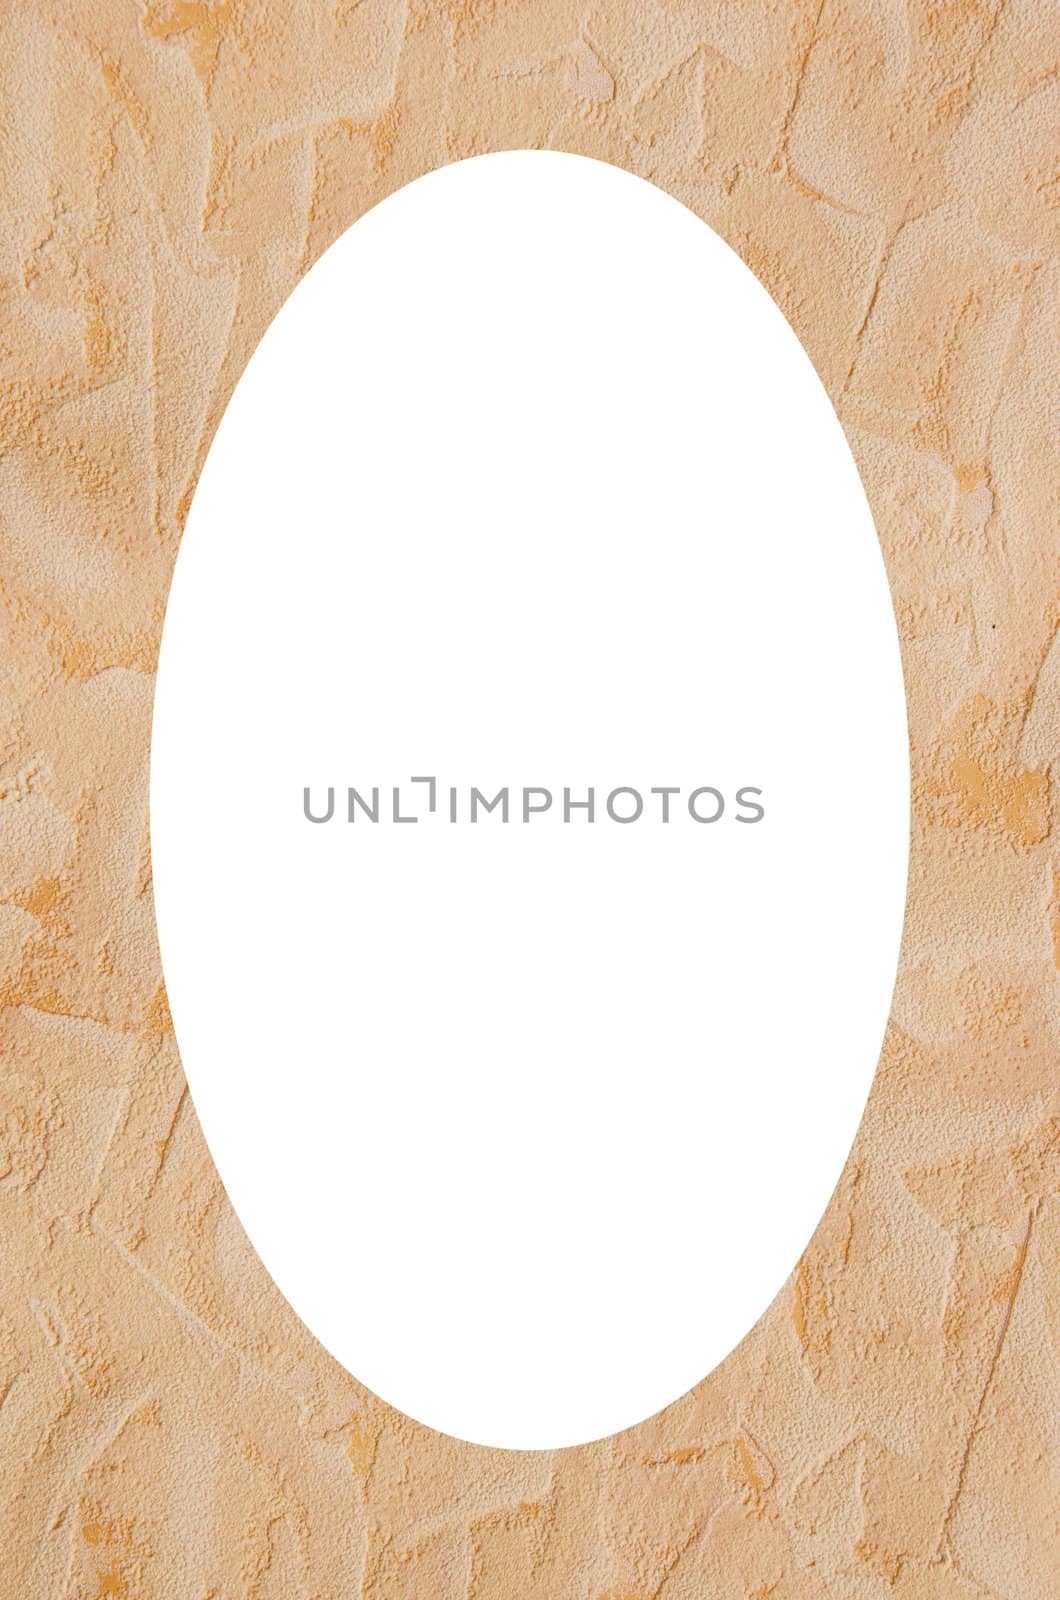 Wallpaper background and white oval in center by sauletas